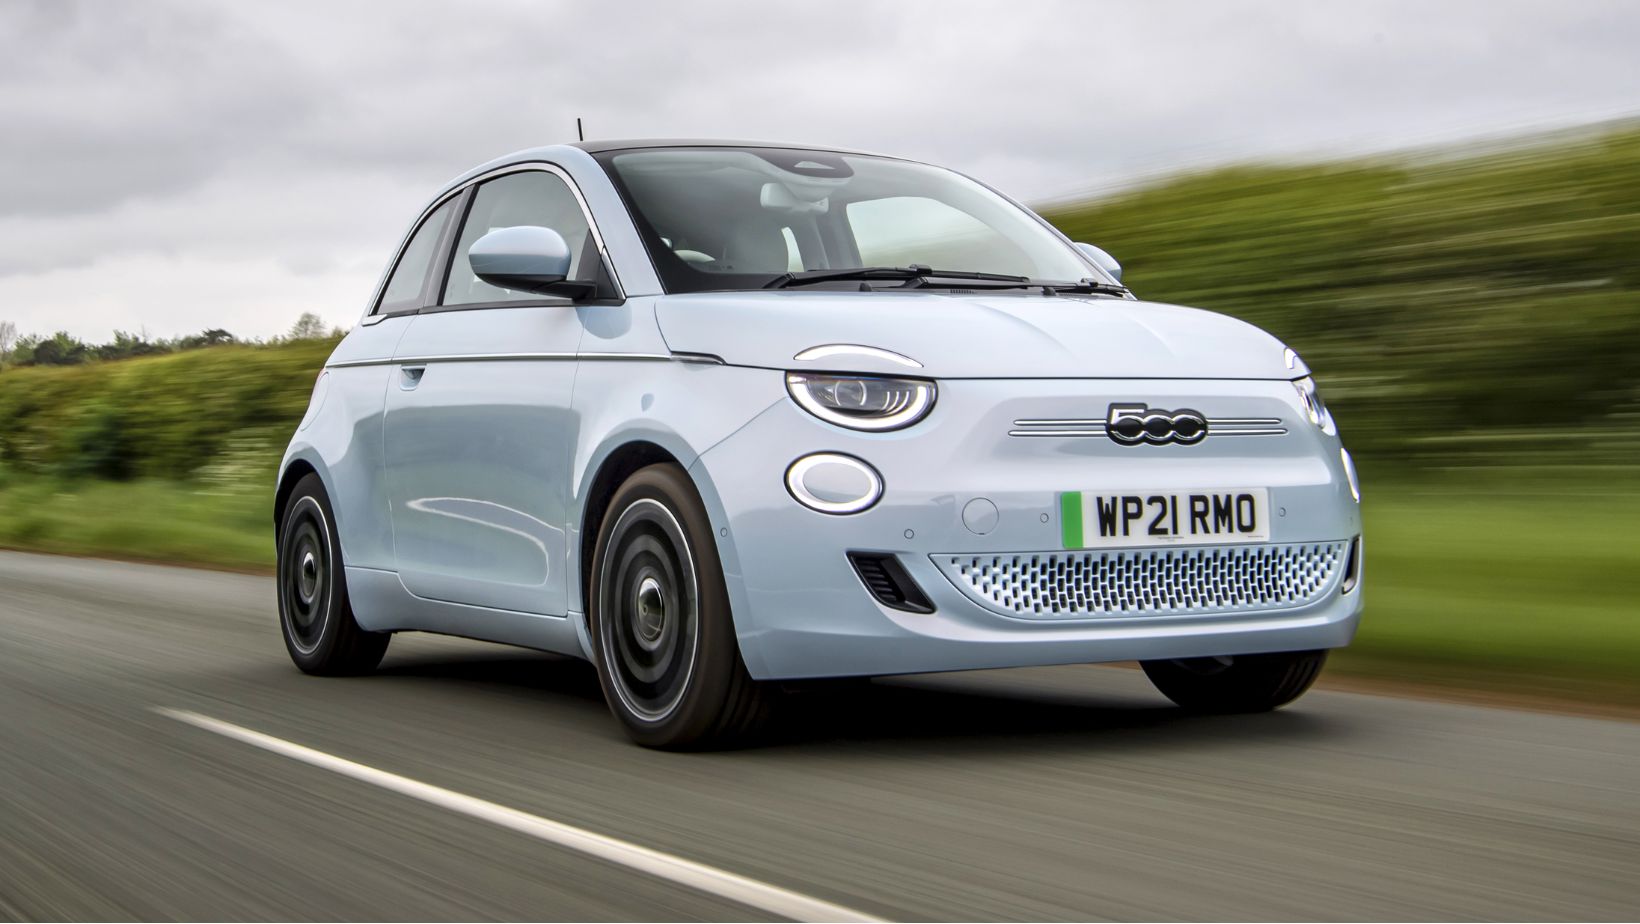 Fiat 500: Price, Launch Date, Top Speed, and Review